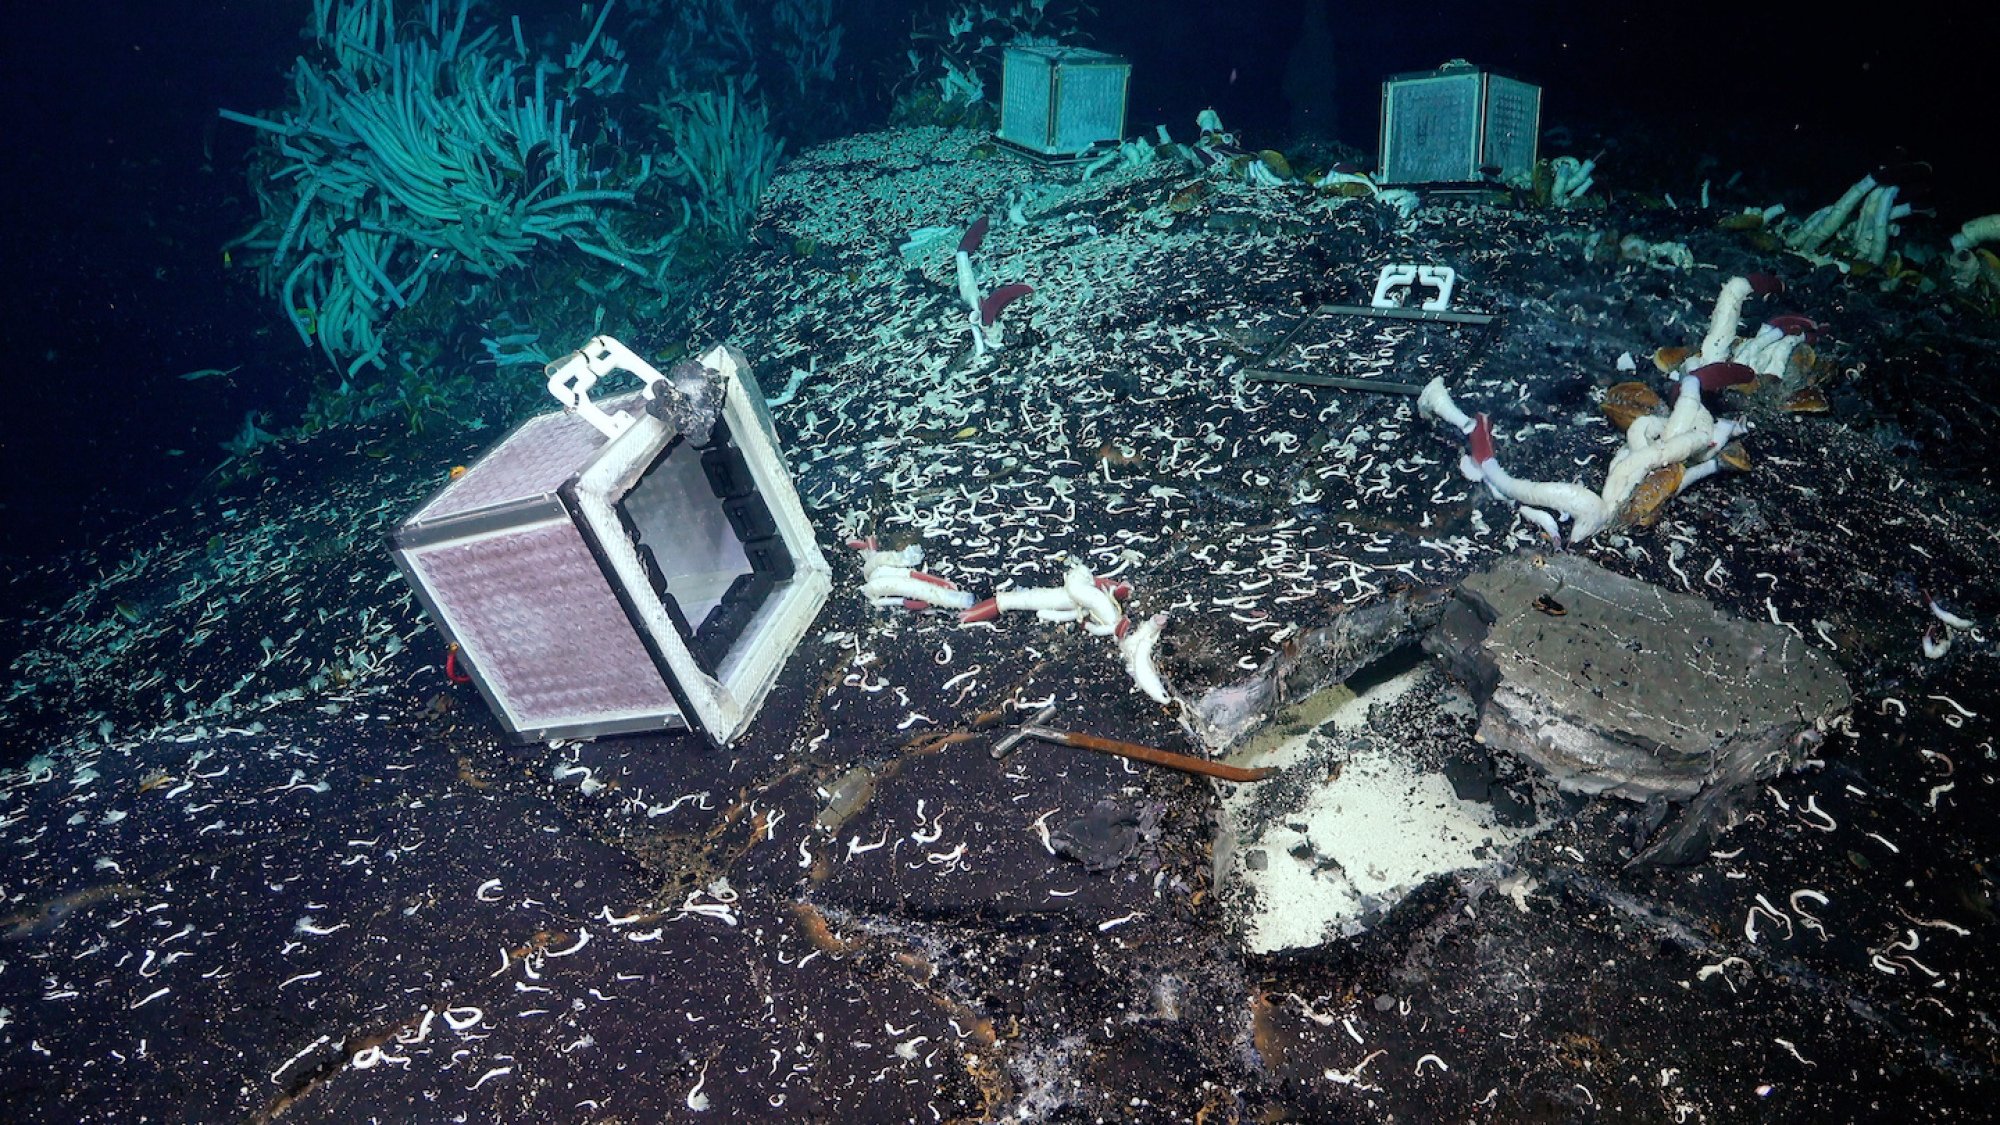 The mesh box experiment showing life travelled beneath the ocean floor.